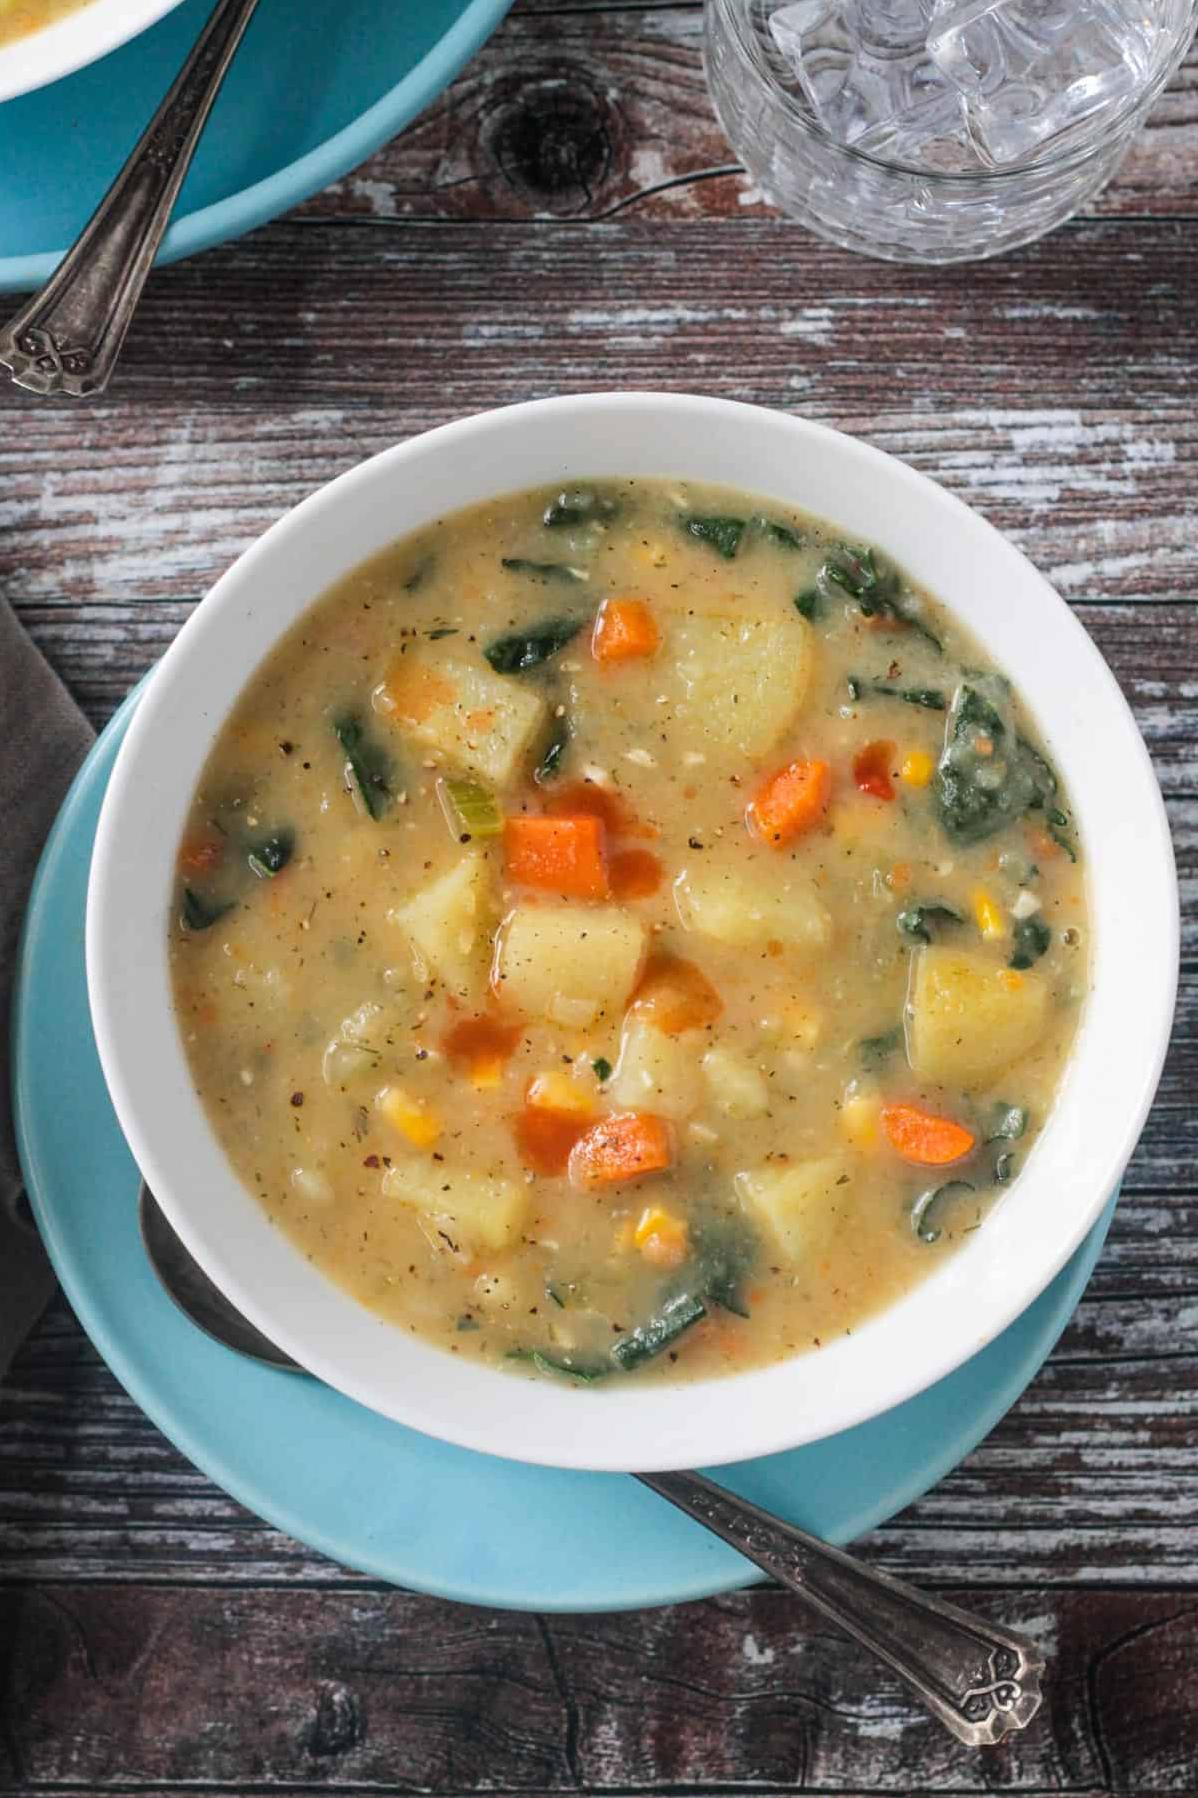  This hearty soup is full of wholesome ingredients and free of gluten and dairy.